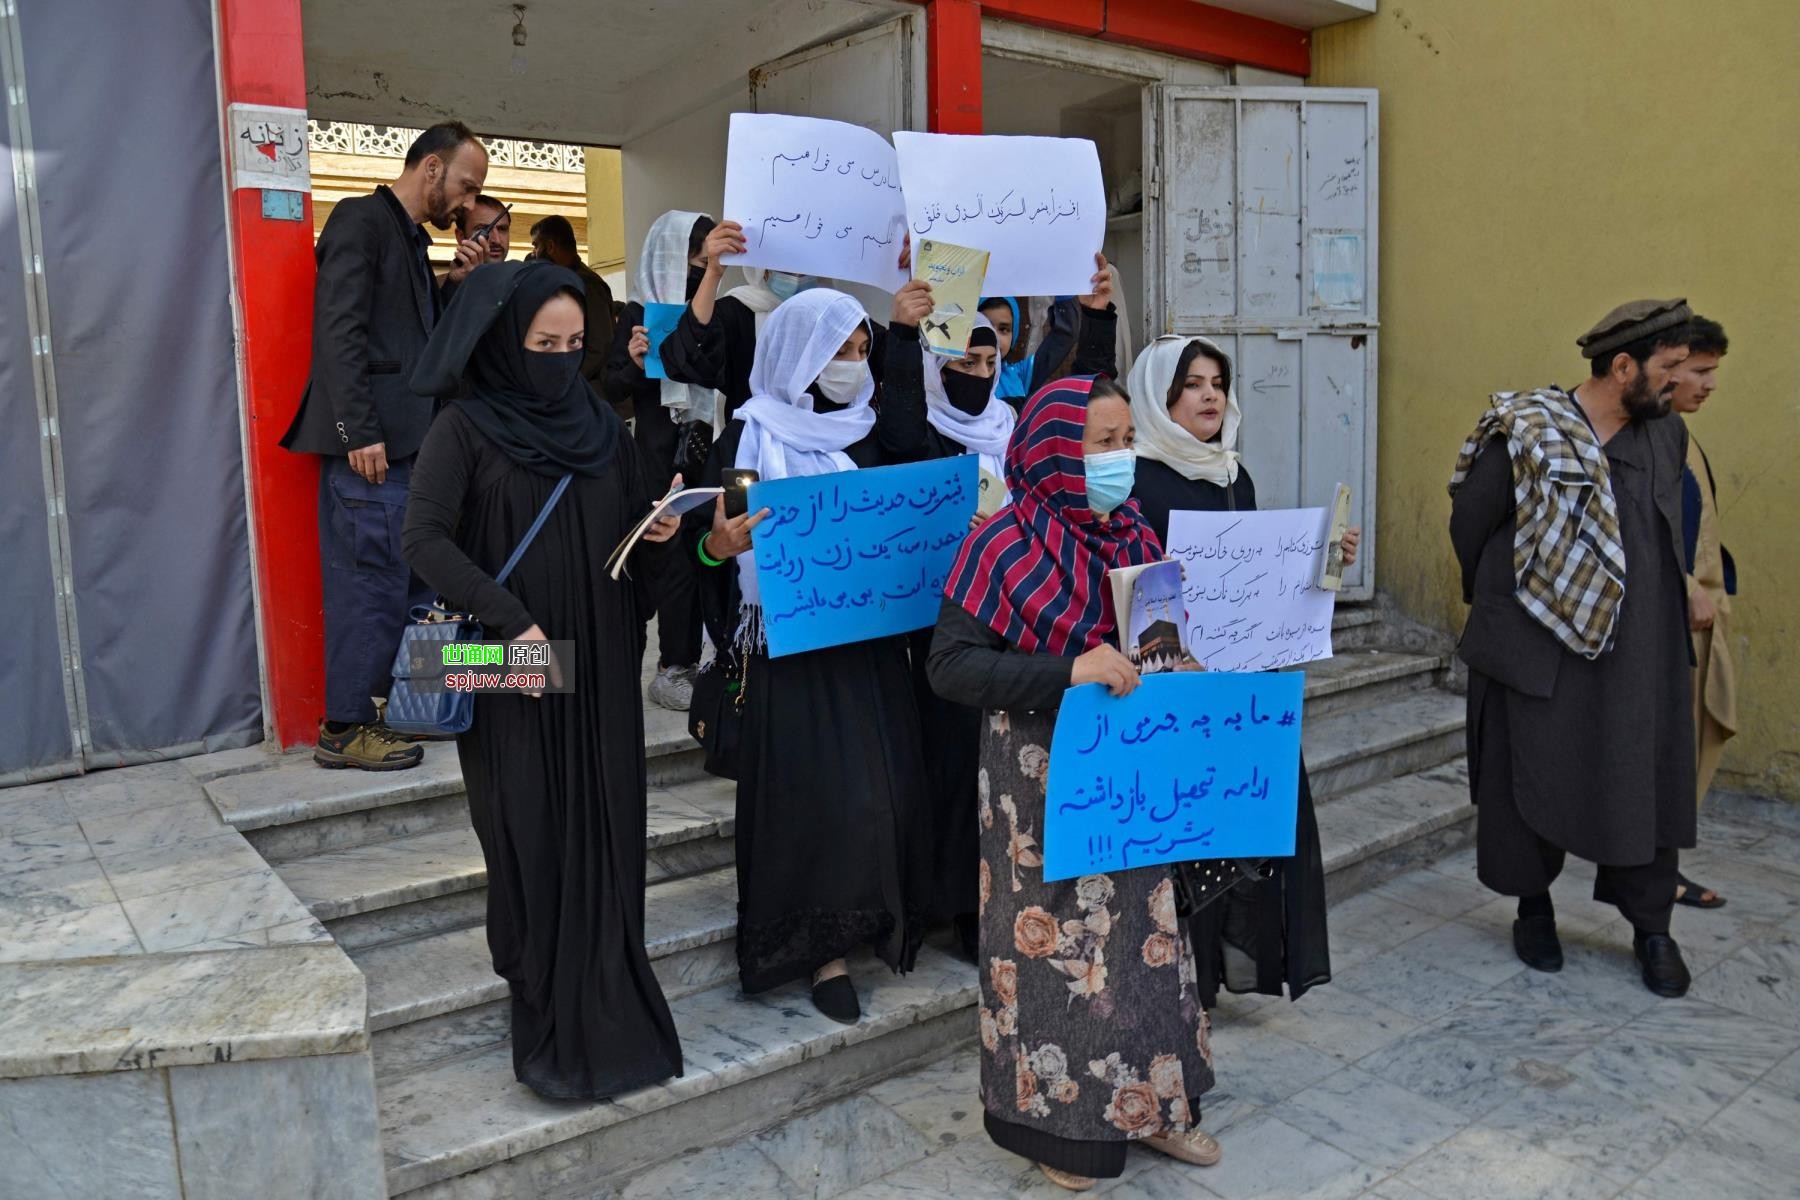 Afghan women take part in a protest outside the Ministry of Education in Kabul demanding that high schools be reopened for girls, Afghanistan, March 26, 2022, (AFP Photo)